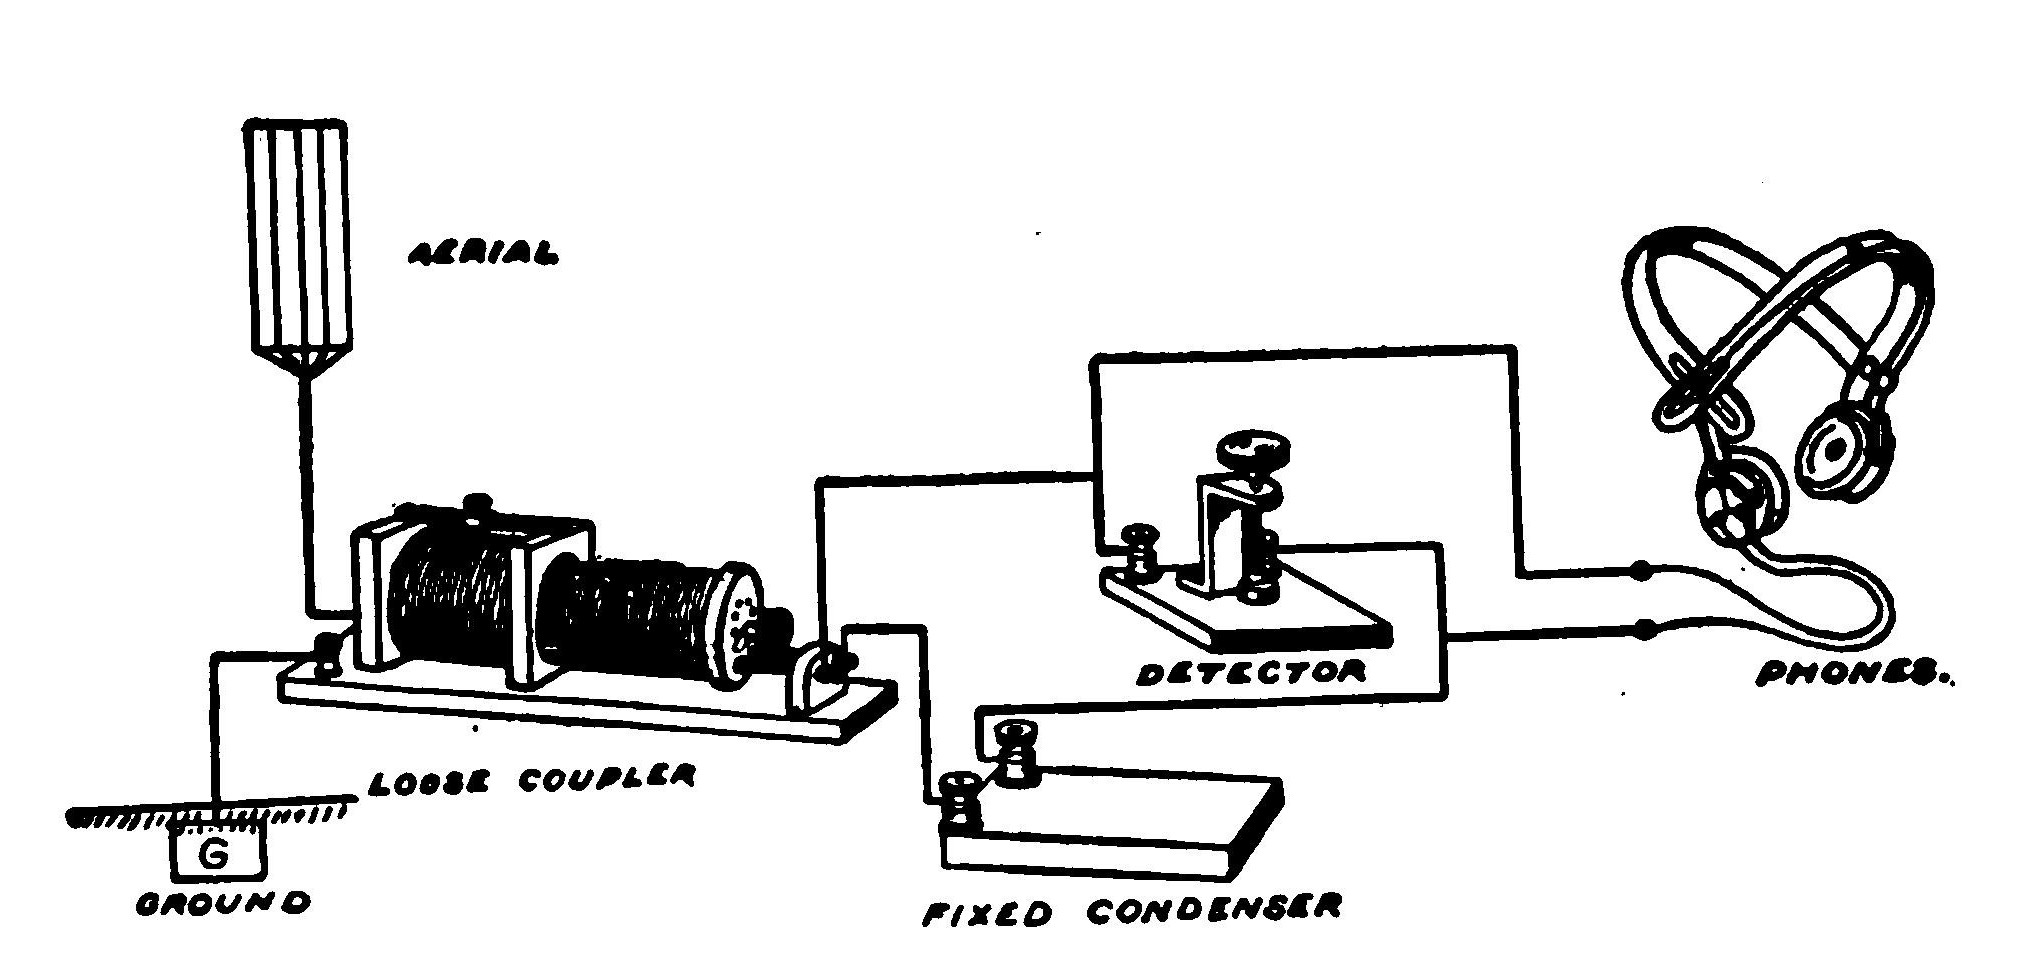 Fig. 219.—Circuit showing how to connect a Loose Coupler.